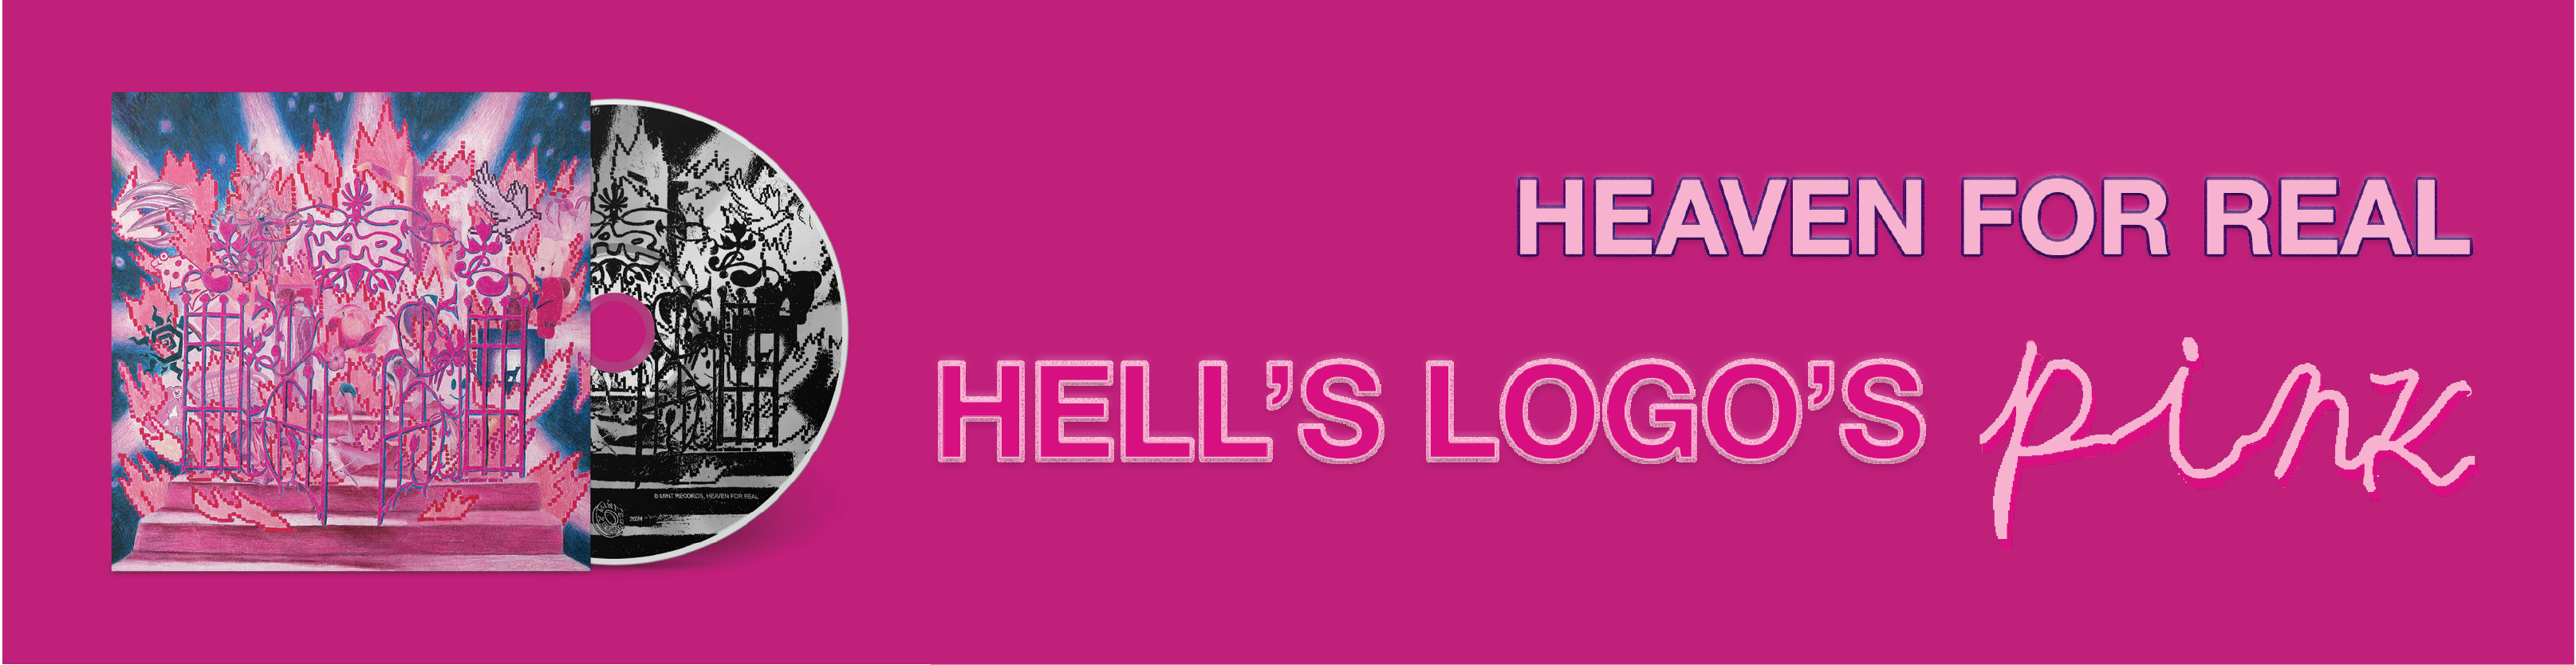 Heaven For Real - Hell's Logo's Pink - store slider